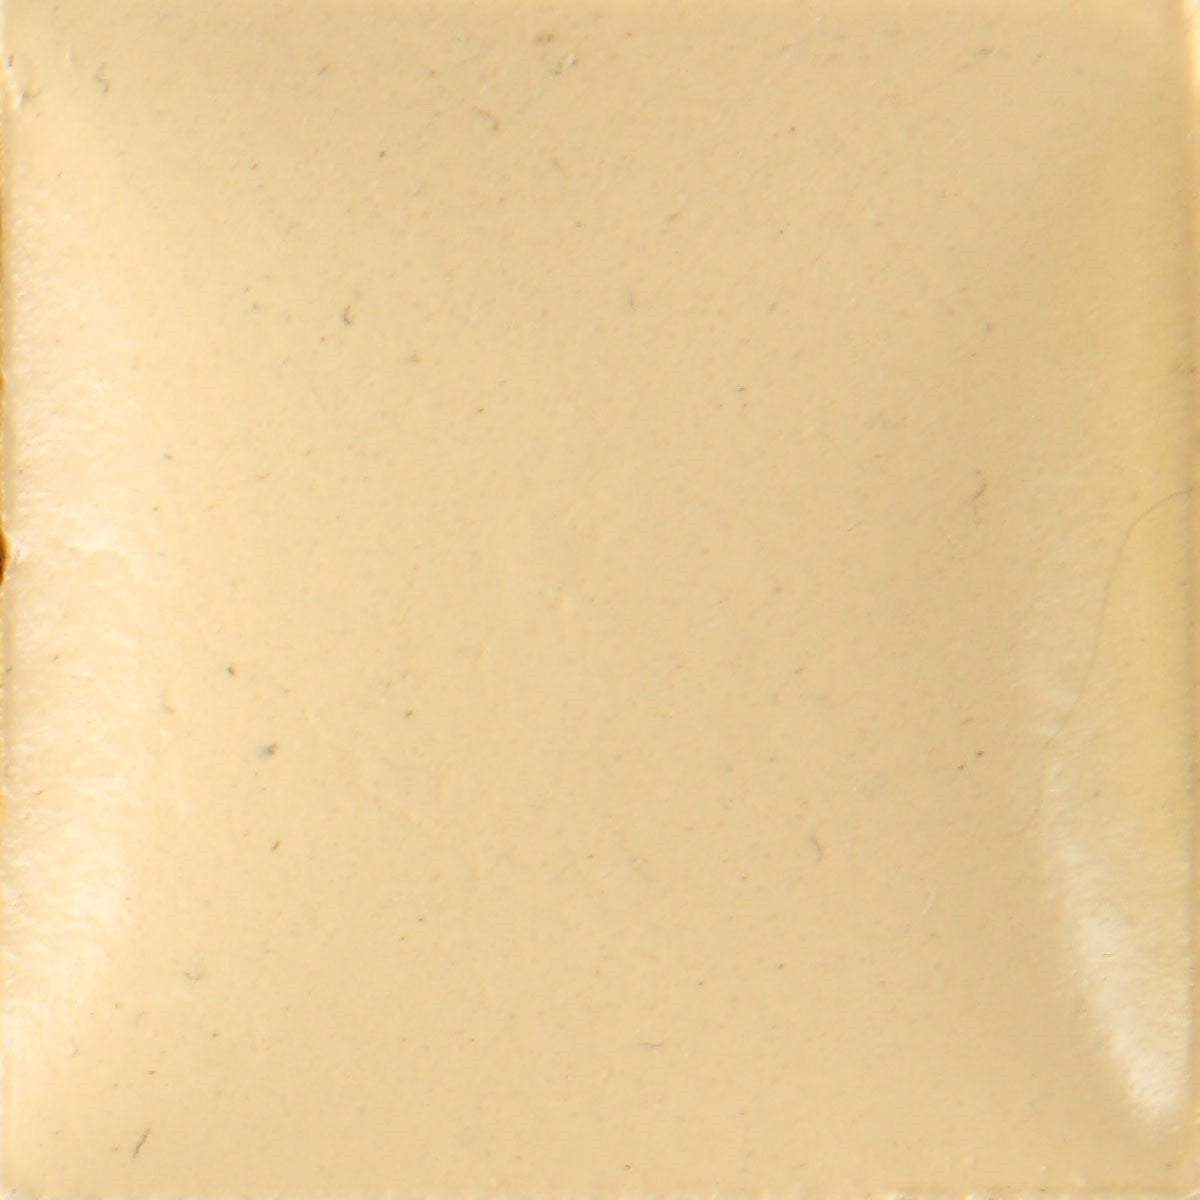 Duncan OS485 French Vanilla Opaque Bisq-Stain, 2 oz